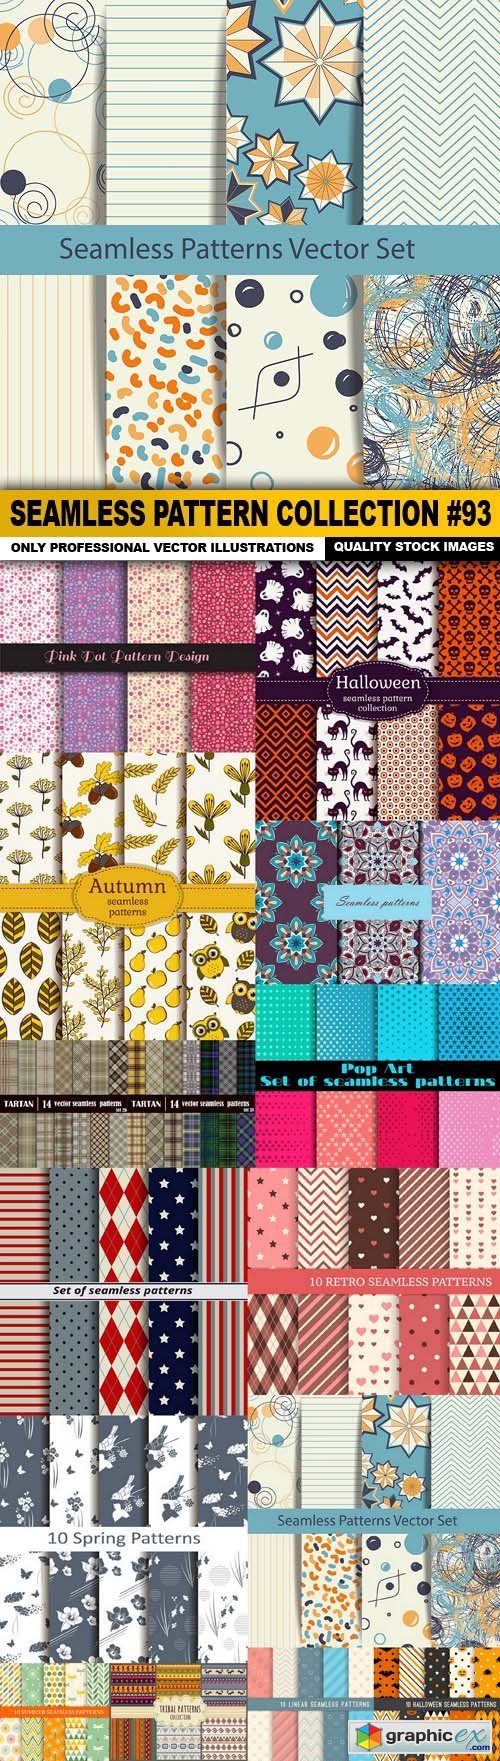 Seamless Pattern Collection #93 - 15 Vector